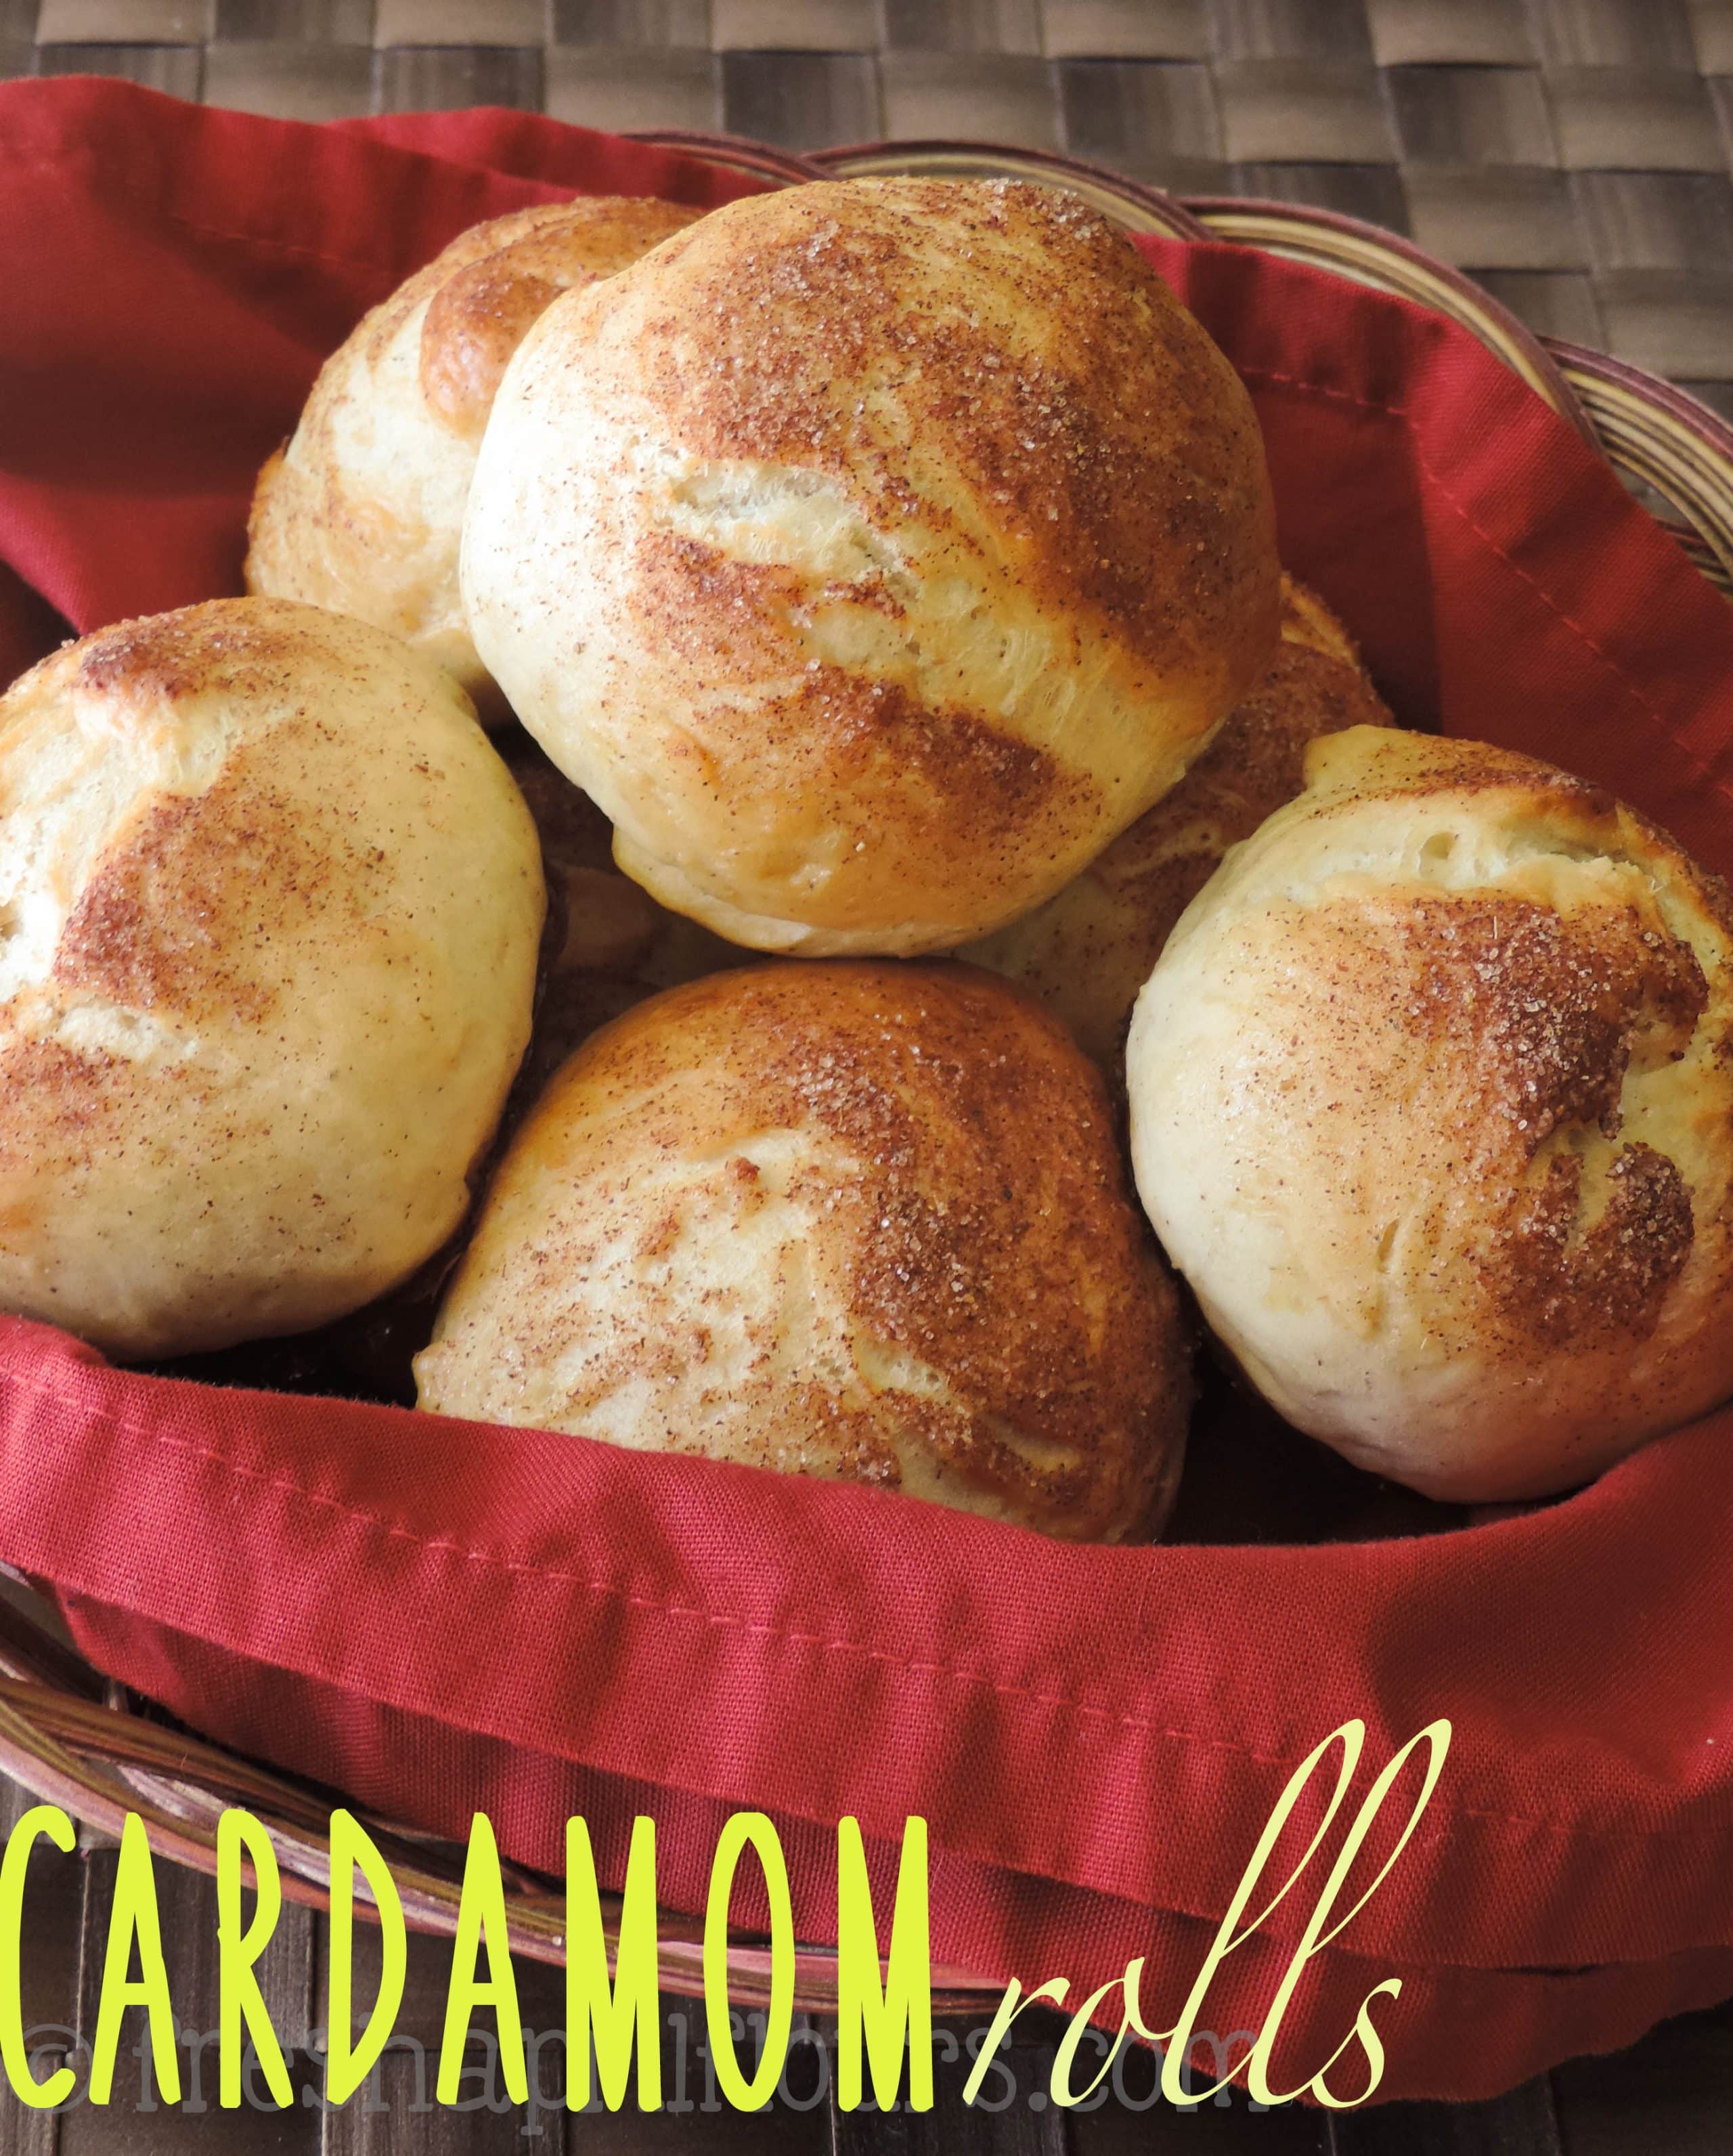 These spiced and slightly sweet yeast rolls are crunchy on the outside and pillowy soft on the inside. via @frshaprilflours